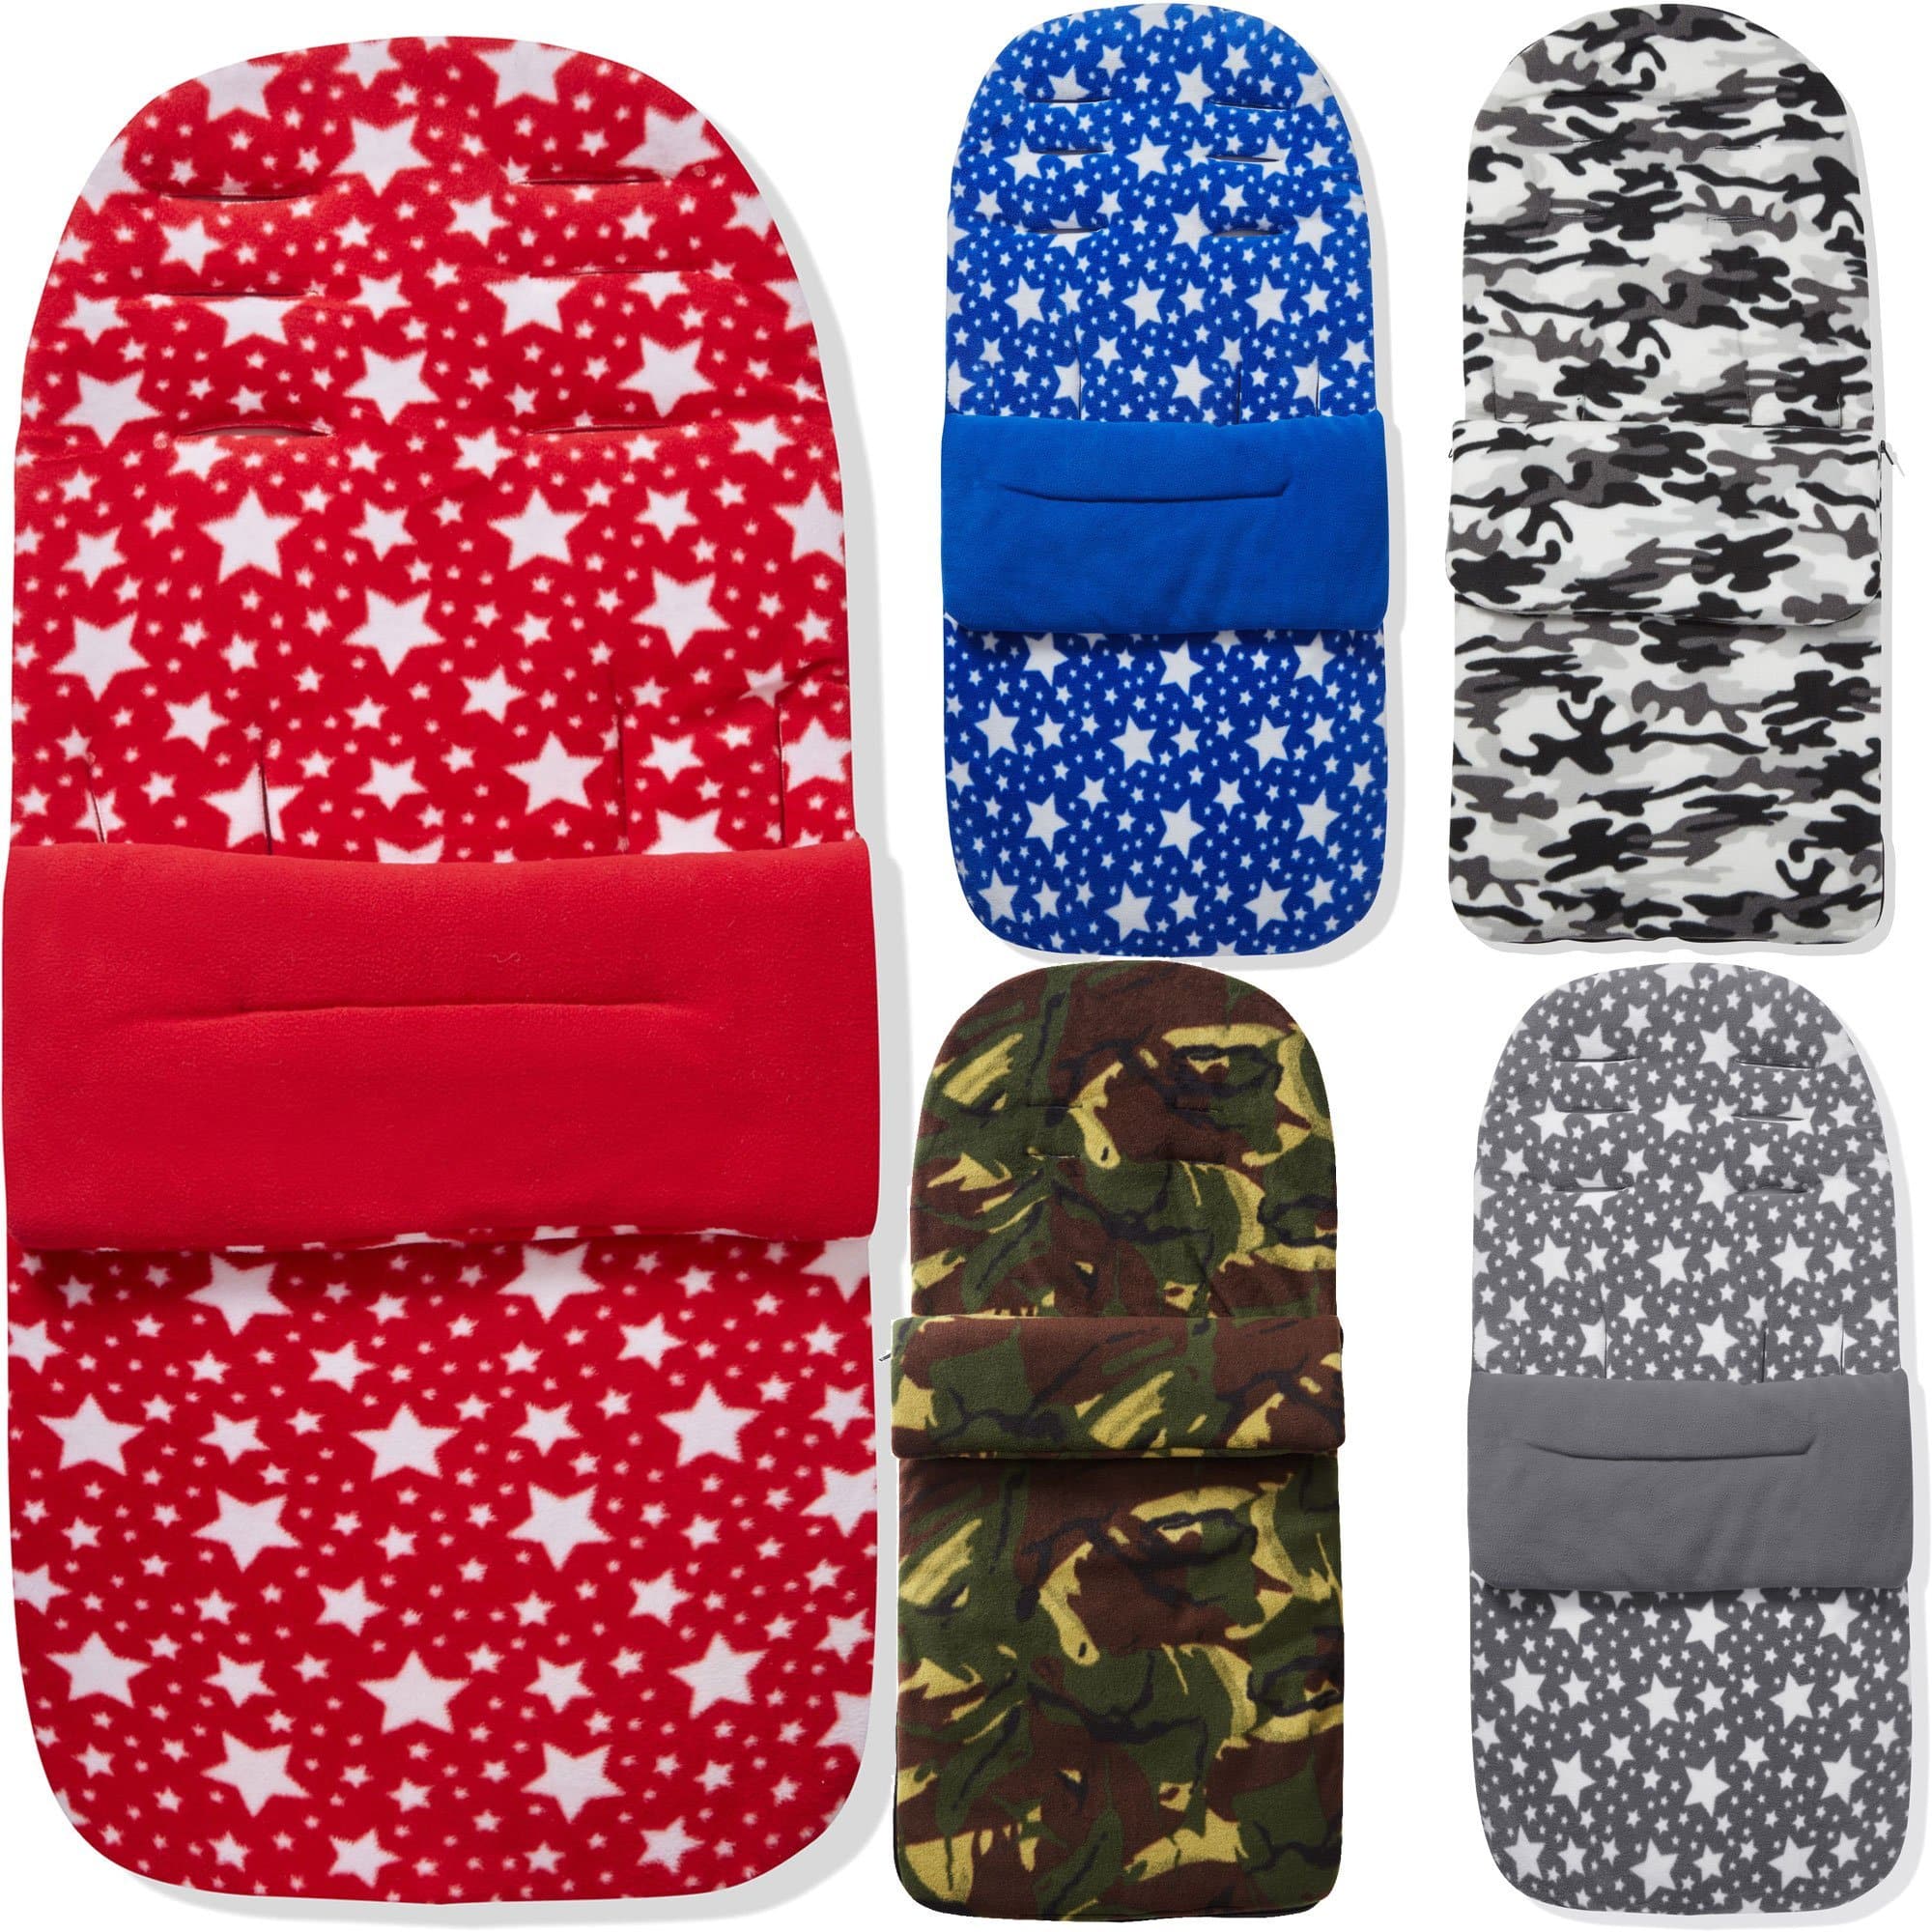 Fleece Footmuff / Cosy Toes Compatible with Nuna -  | For Your Little One